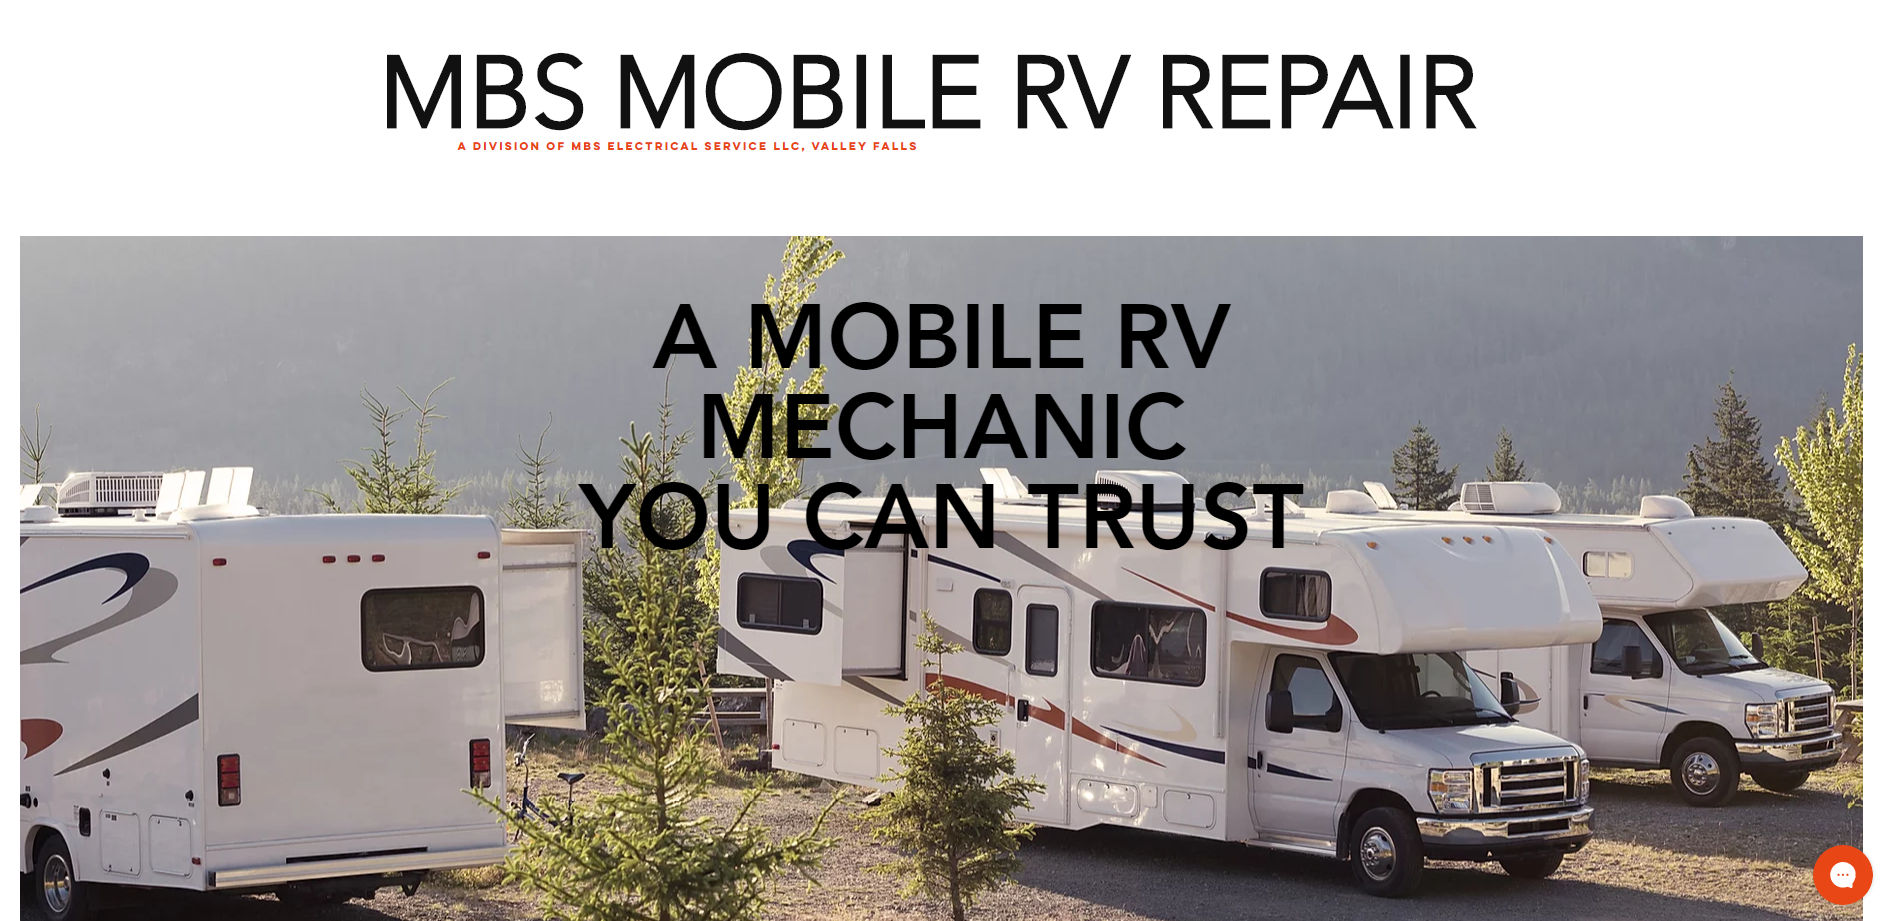 Services & Products MBS Mobile RV Repair in Valley Falls KS